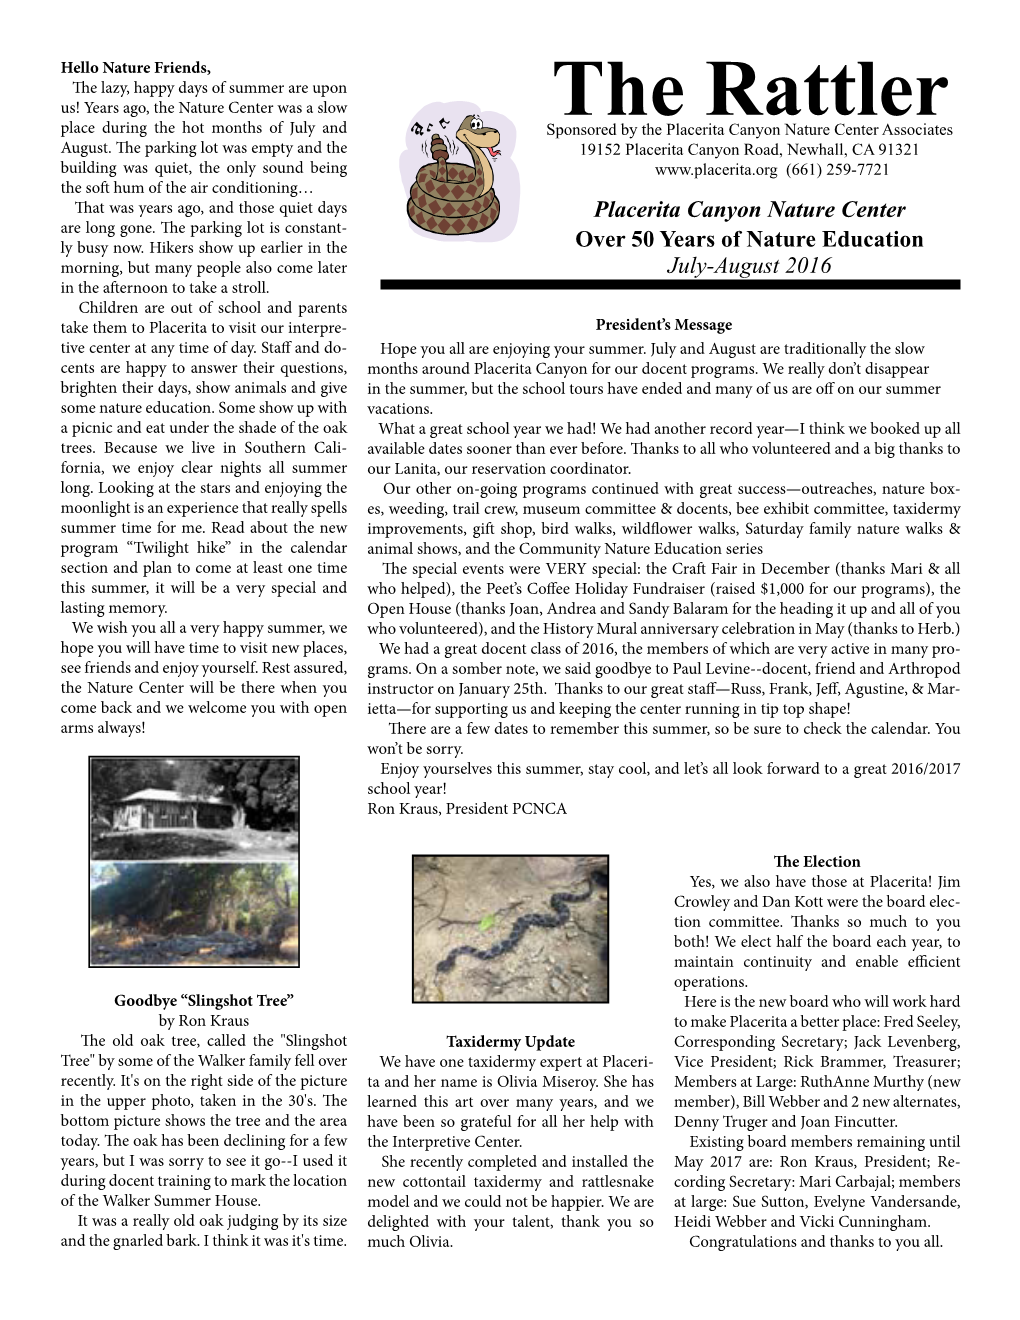 To Read the Entire Rattler (PDF Version)